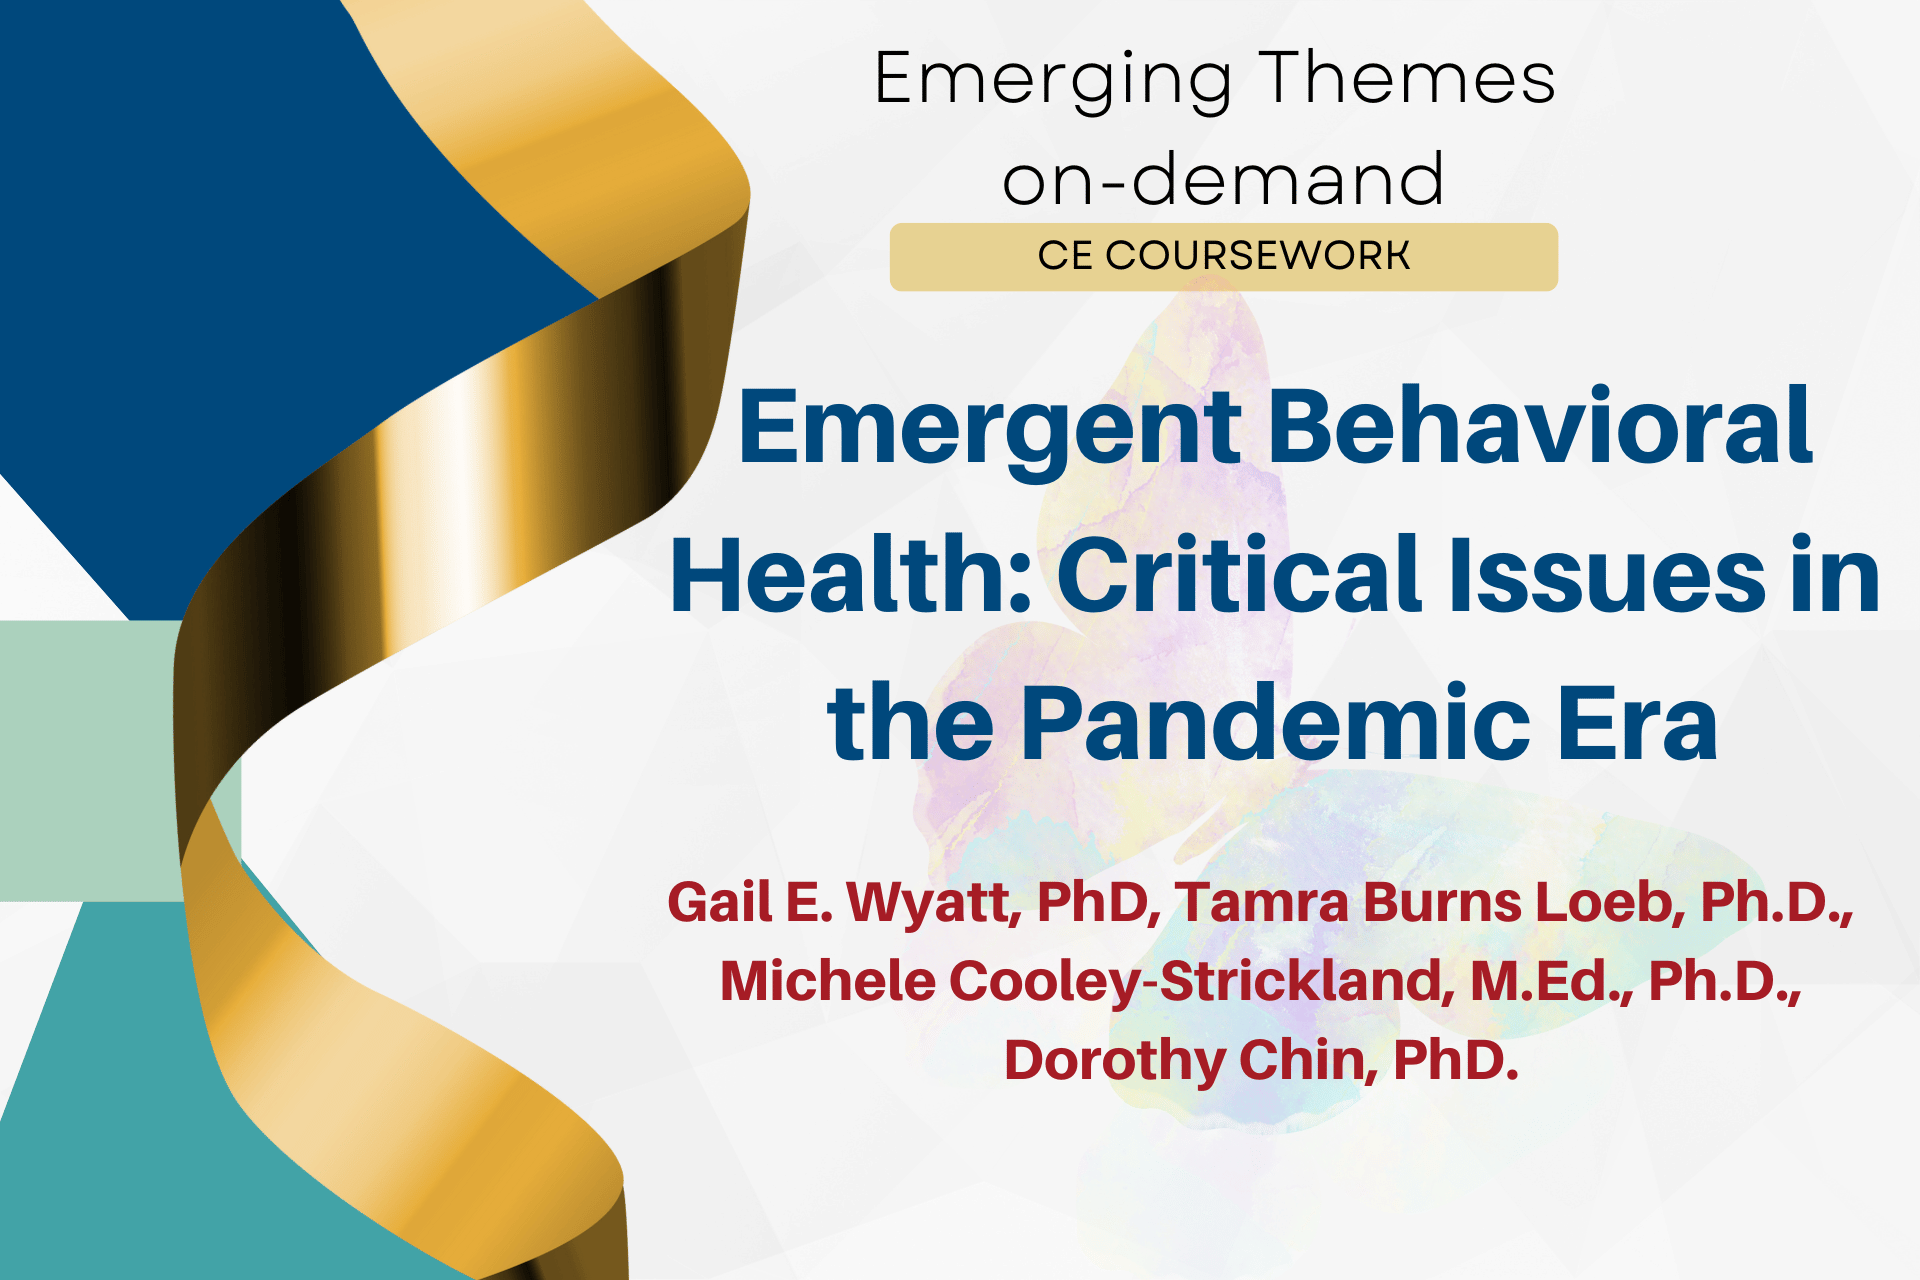 Emergent Behavioral Health: Critical Issues in the Pandemic Era